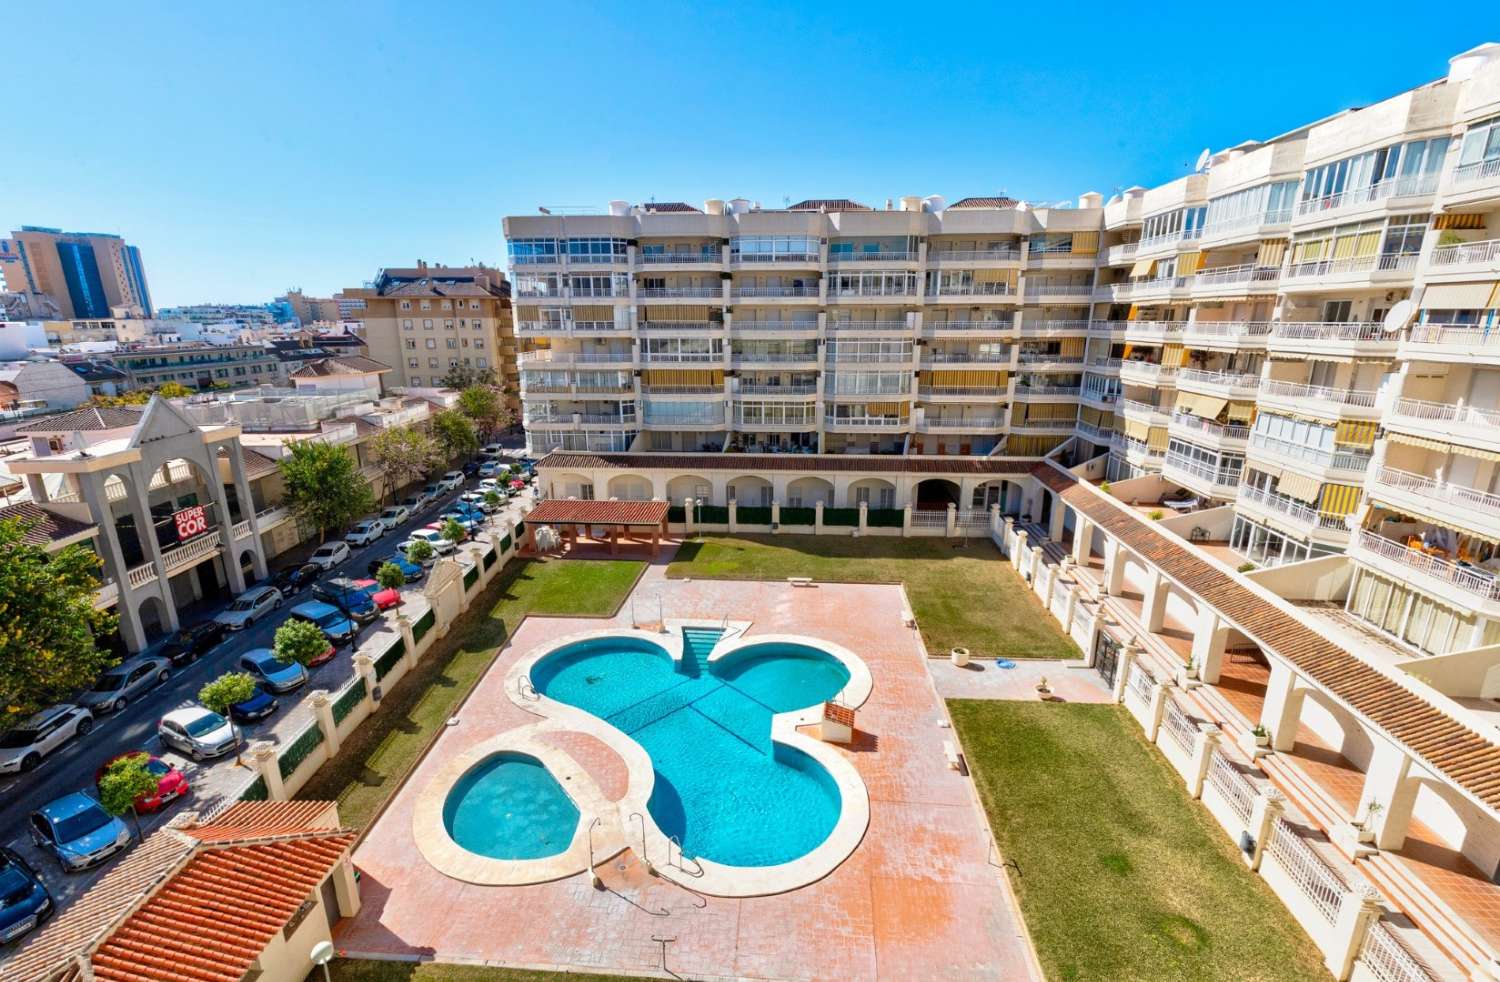 Apartment for sale only 300 meters from the beach in Los Boliches, Fuengirola